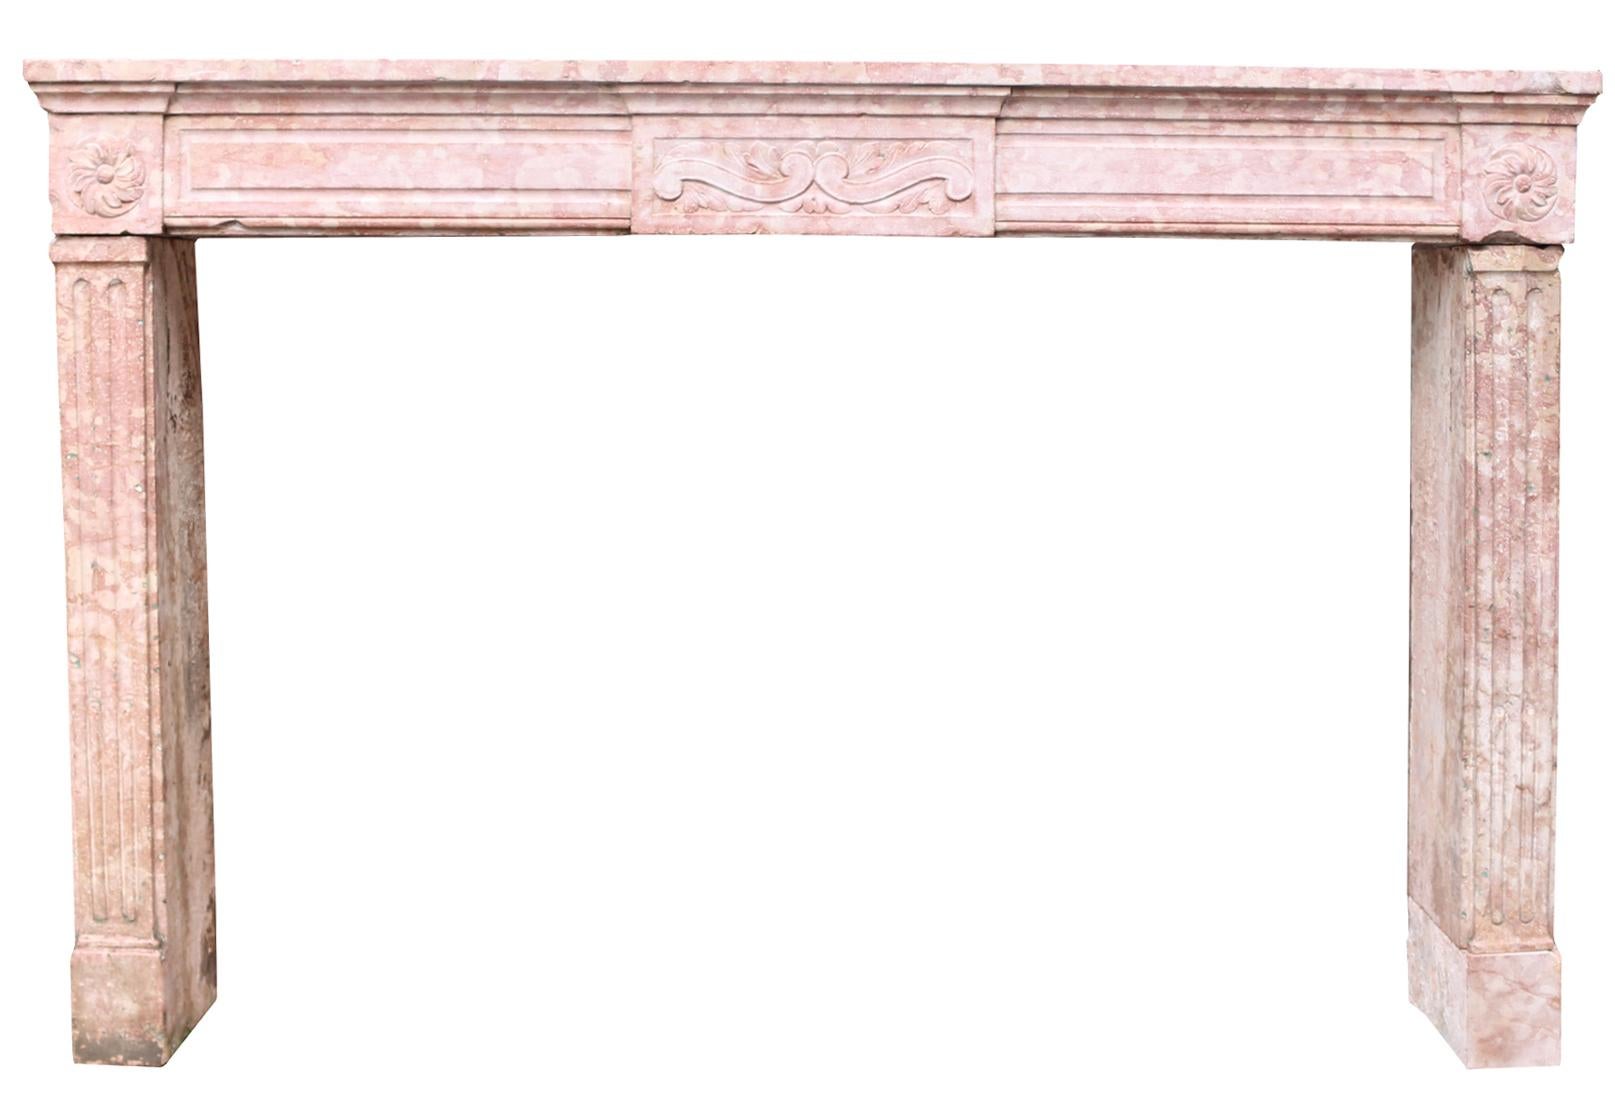 A period Louis XVI fireplace surround in Pierre de Bourguignon, Burgundy Stone with marble like characteristics. French, late 18th century. Pale cream and pink tones.

Additional dimensions

Opening height 96.5 cm

Opening width 150.5